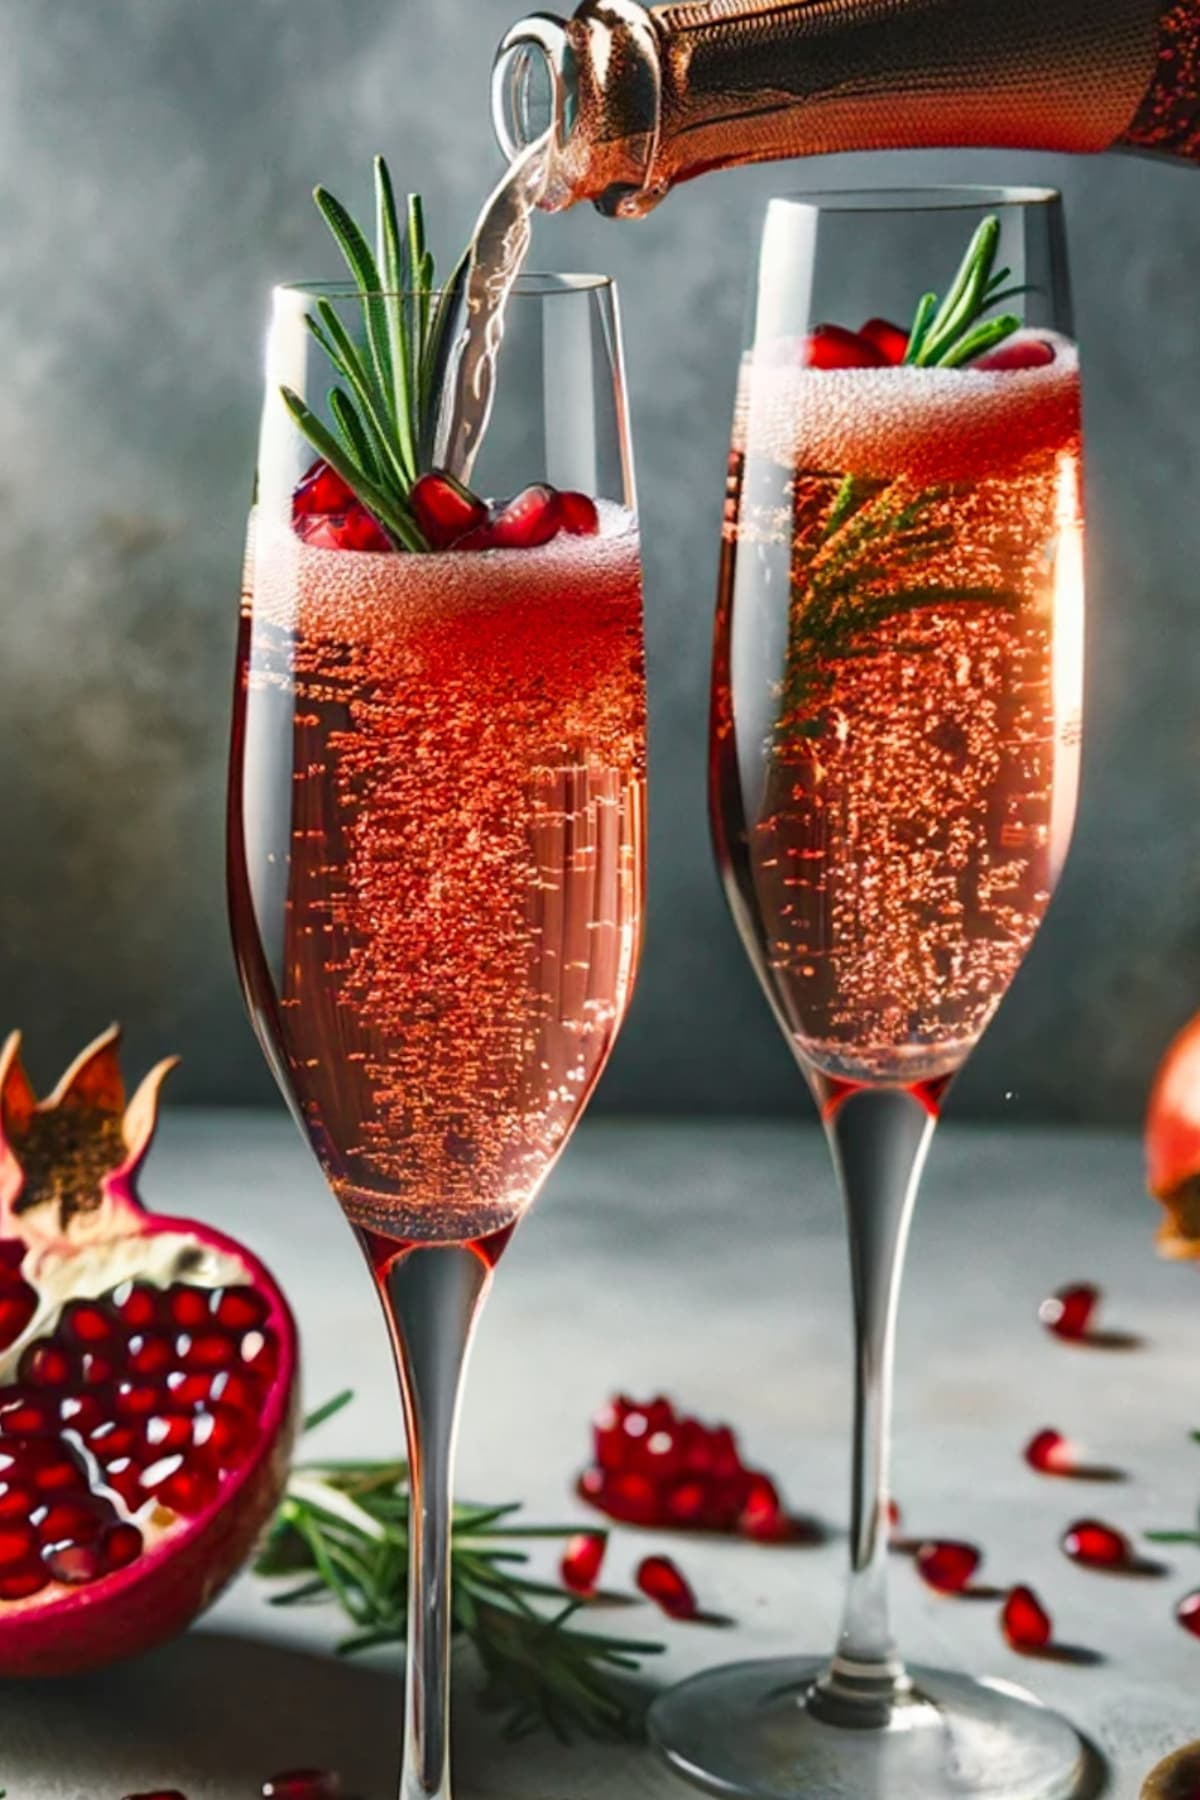 Adding champagne to a flute glass garnished with a rosemary sprig and pomegranate seeds.